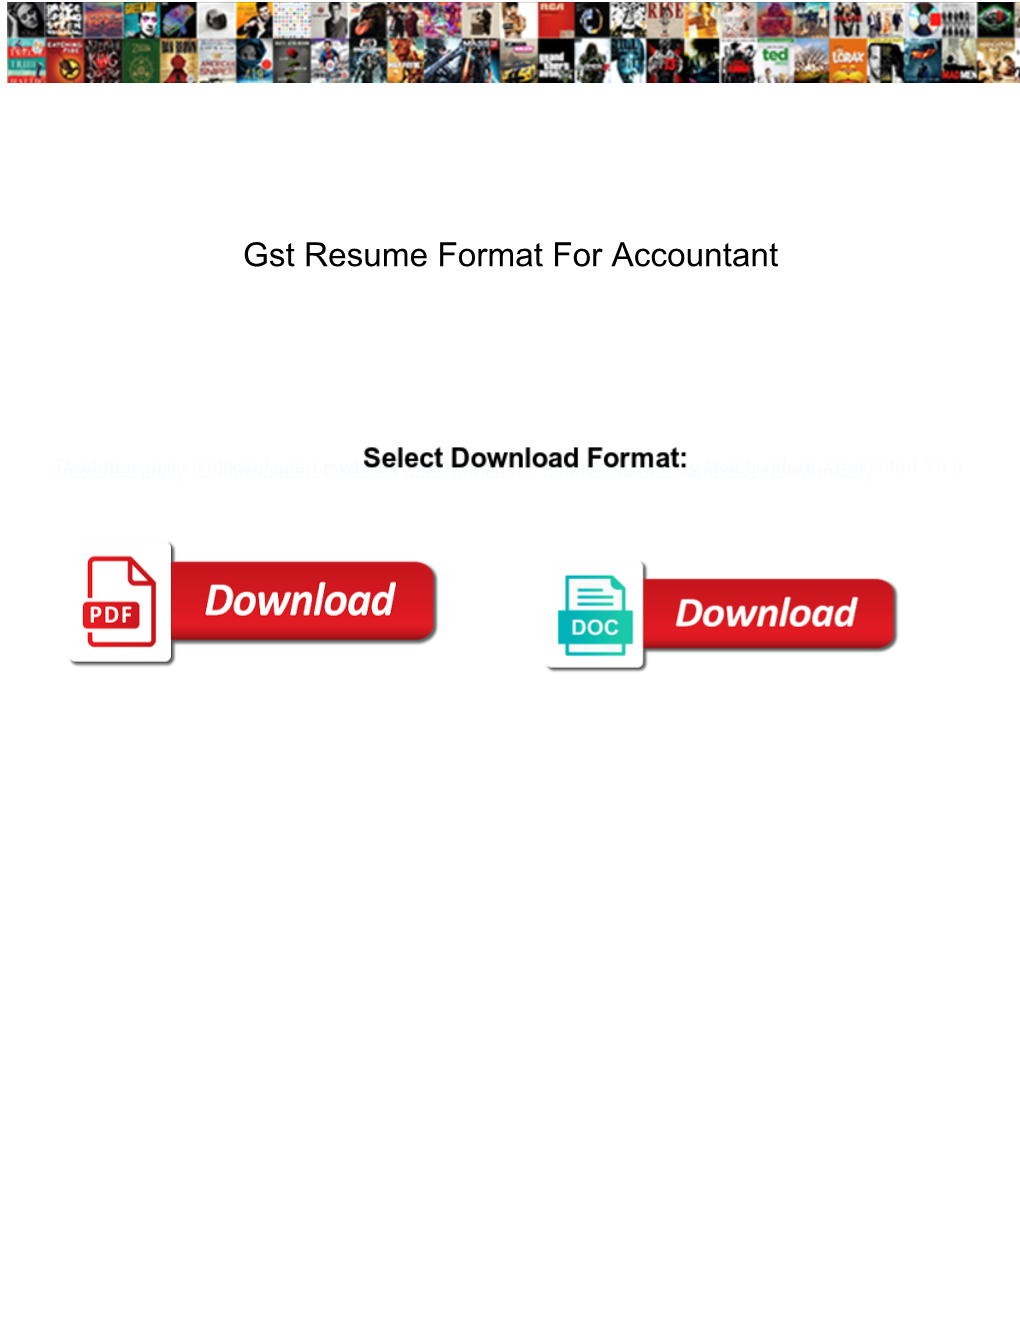 Gst-Resume-Format-For-Accountant.Pdf